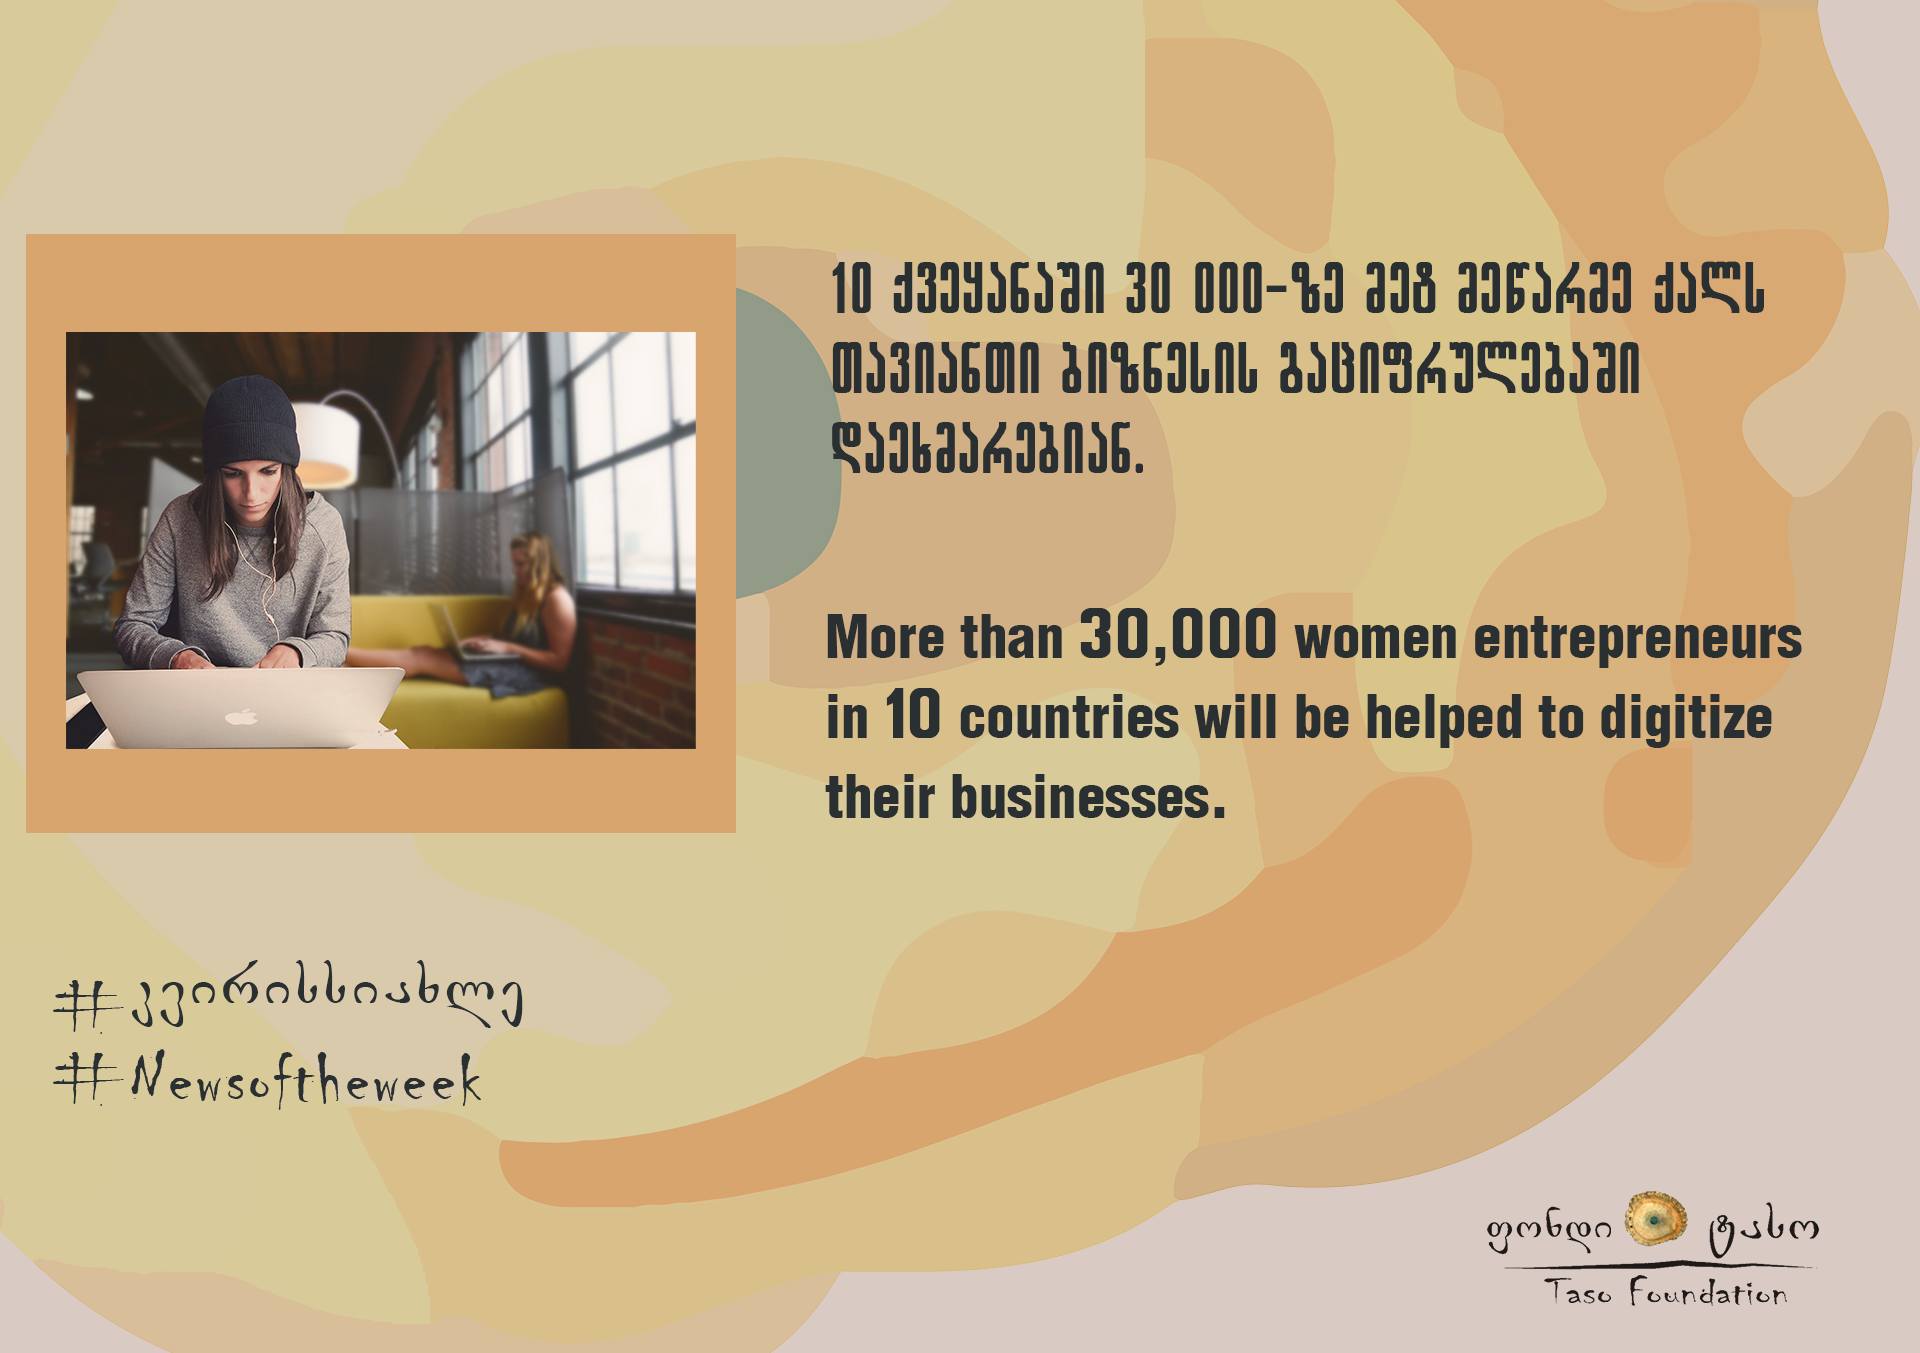 Women entrepreneurs will be helped to digitize their businesses